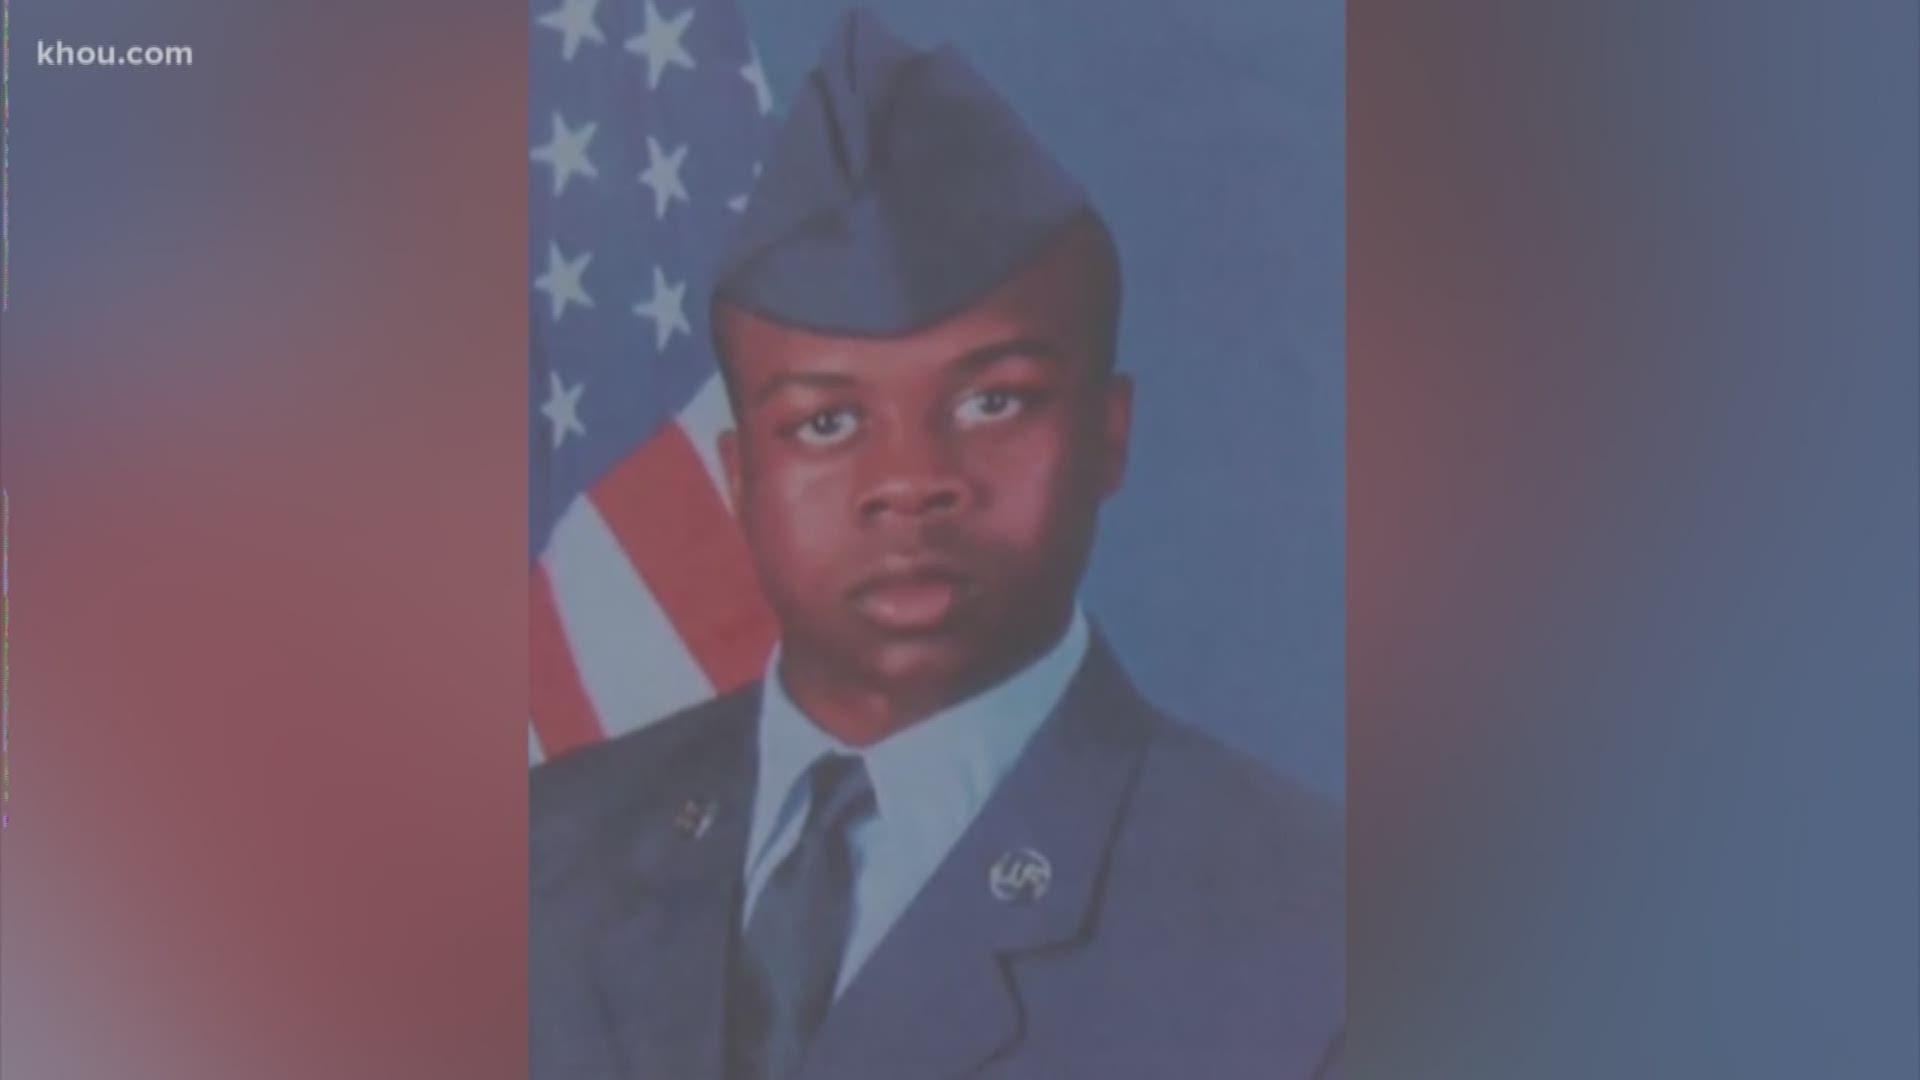 The family of a missing Air Force veteran is begging for help on the one-year anniversary of his disappearance.